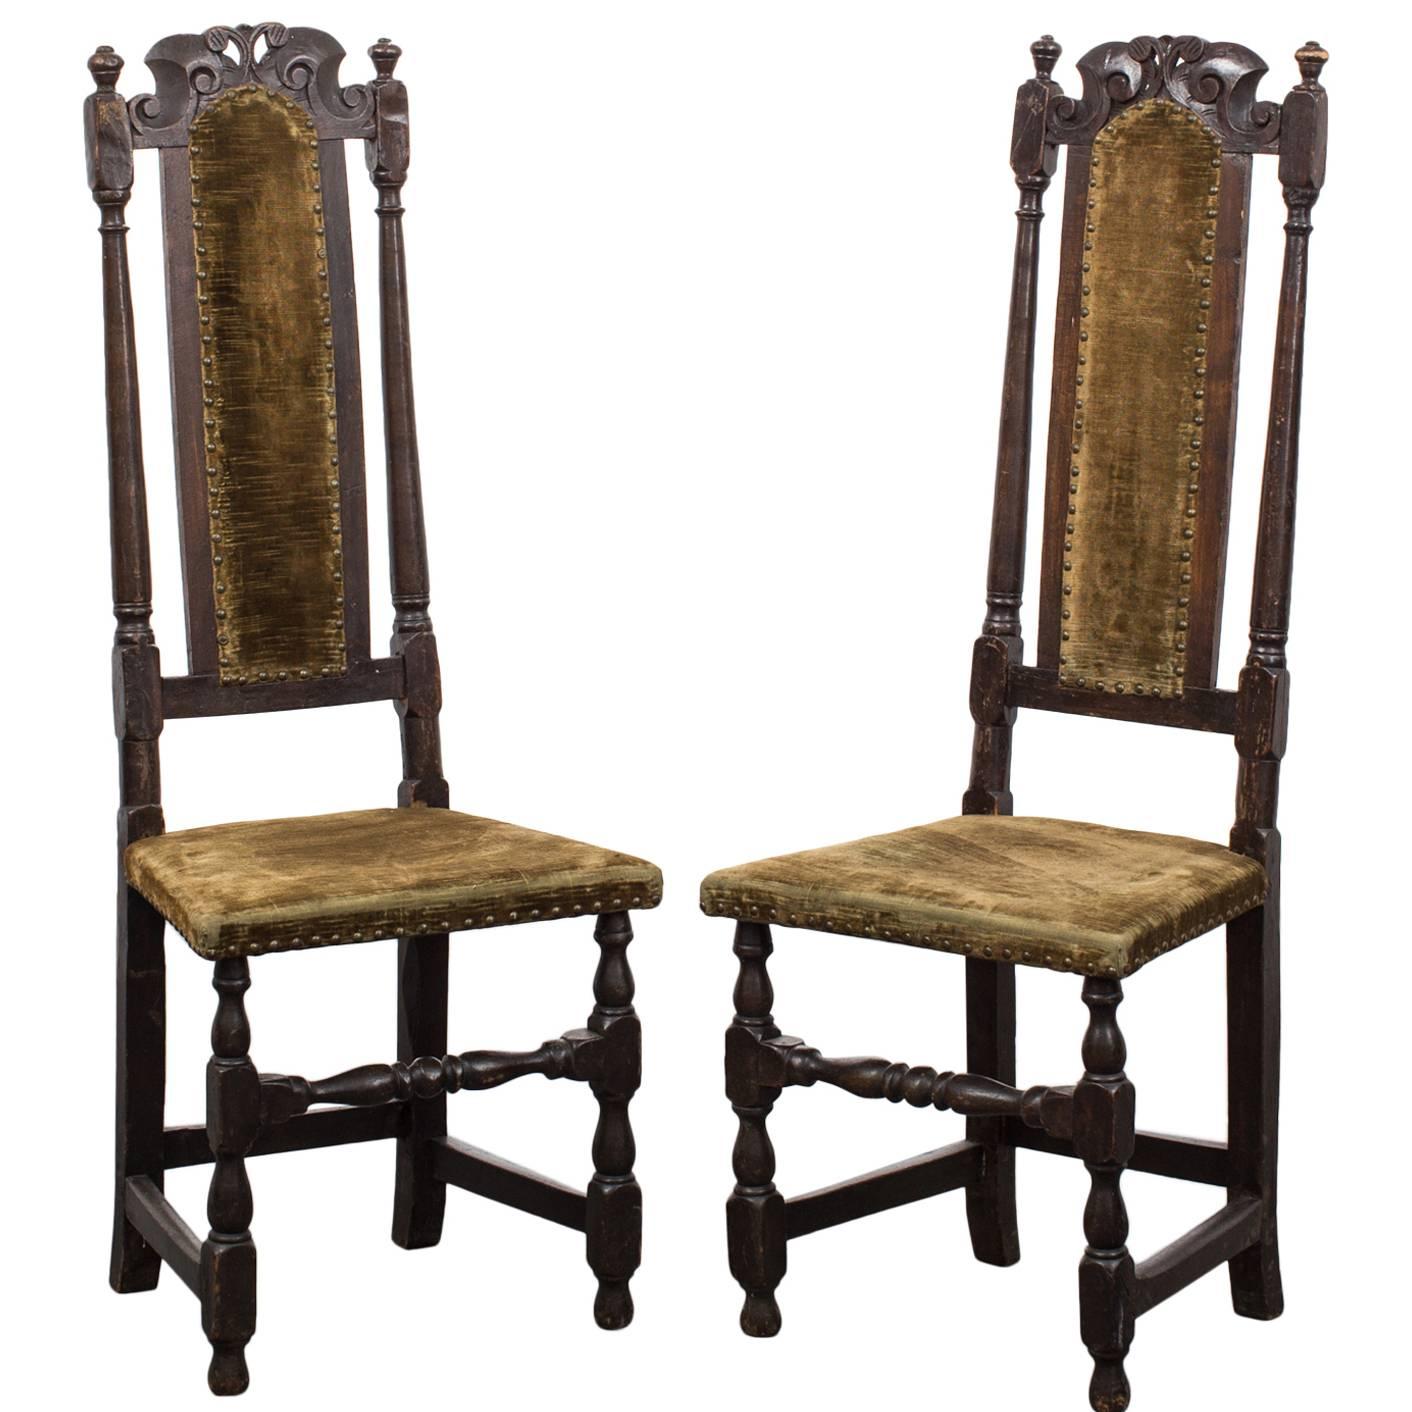 Pair of Side Chairs Baroque Period, 18th Century, Europe